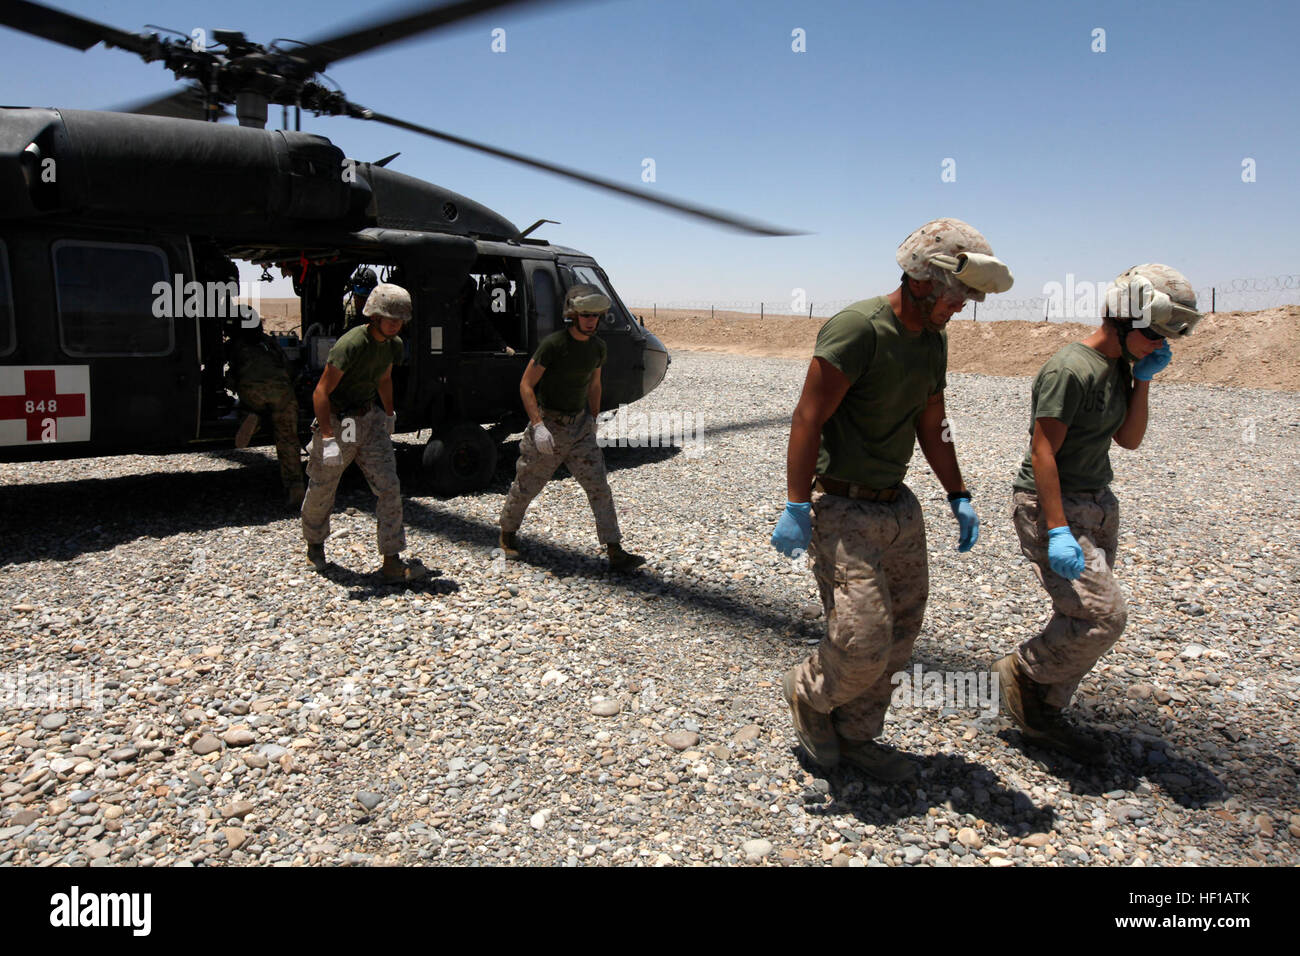 U.S. Marines with Surgical Platoon, Combat Logistics Company, Combat Logistics Regiment 2, walk away from a UH-60 Black Hawk after carrying an injured Afghan National Army Soldier at Combat Outpost Shukvani, Helmand province, Afghanistan, June 8, 2013. The Marines are part of the shock trauma platoon, responsible for providing medical care to casualties brought to Shukvani. (U.S. Marine Corps photo by Sgt. Gabriela Garcia/Released) STP aides an injured Afghan 130608-M-SA716-293 Stock Photo